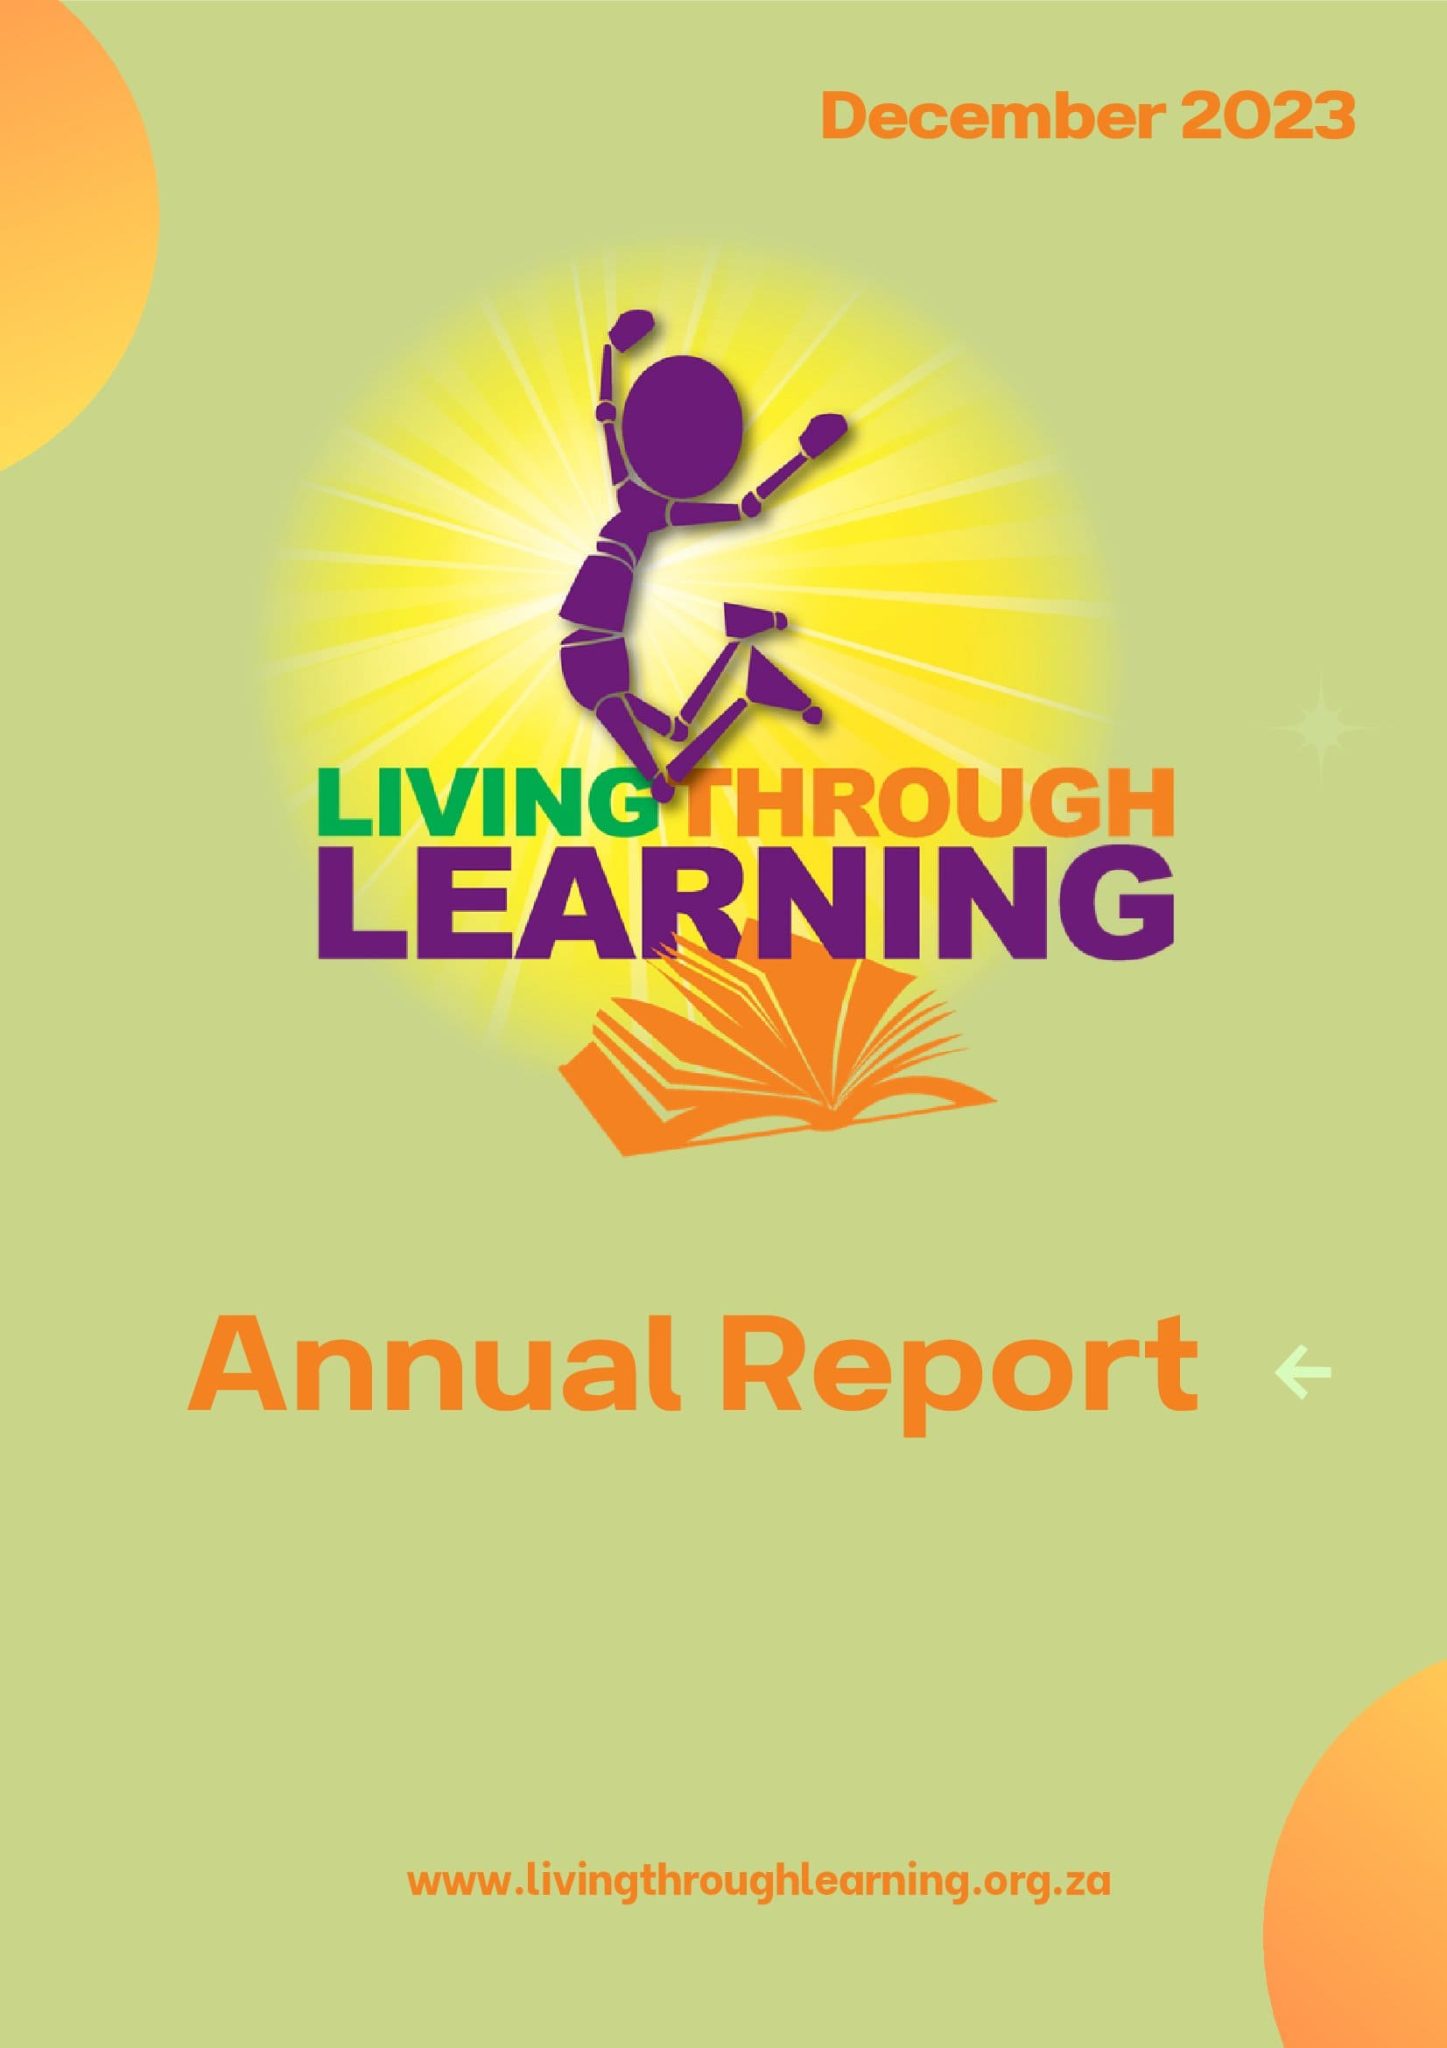 Living through Learning - Annual Report 2023 (1)_00001